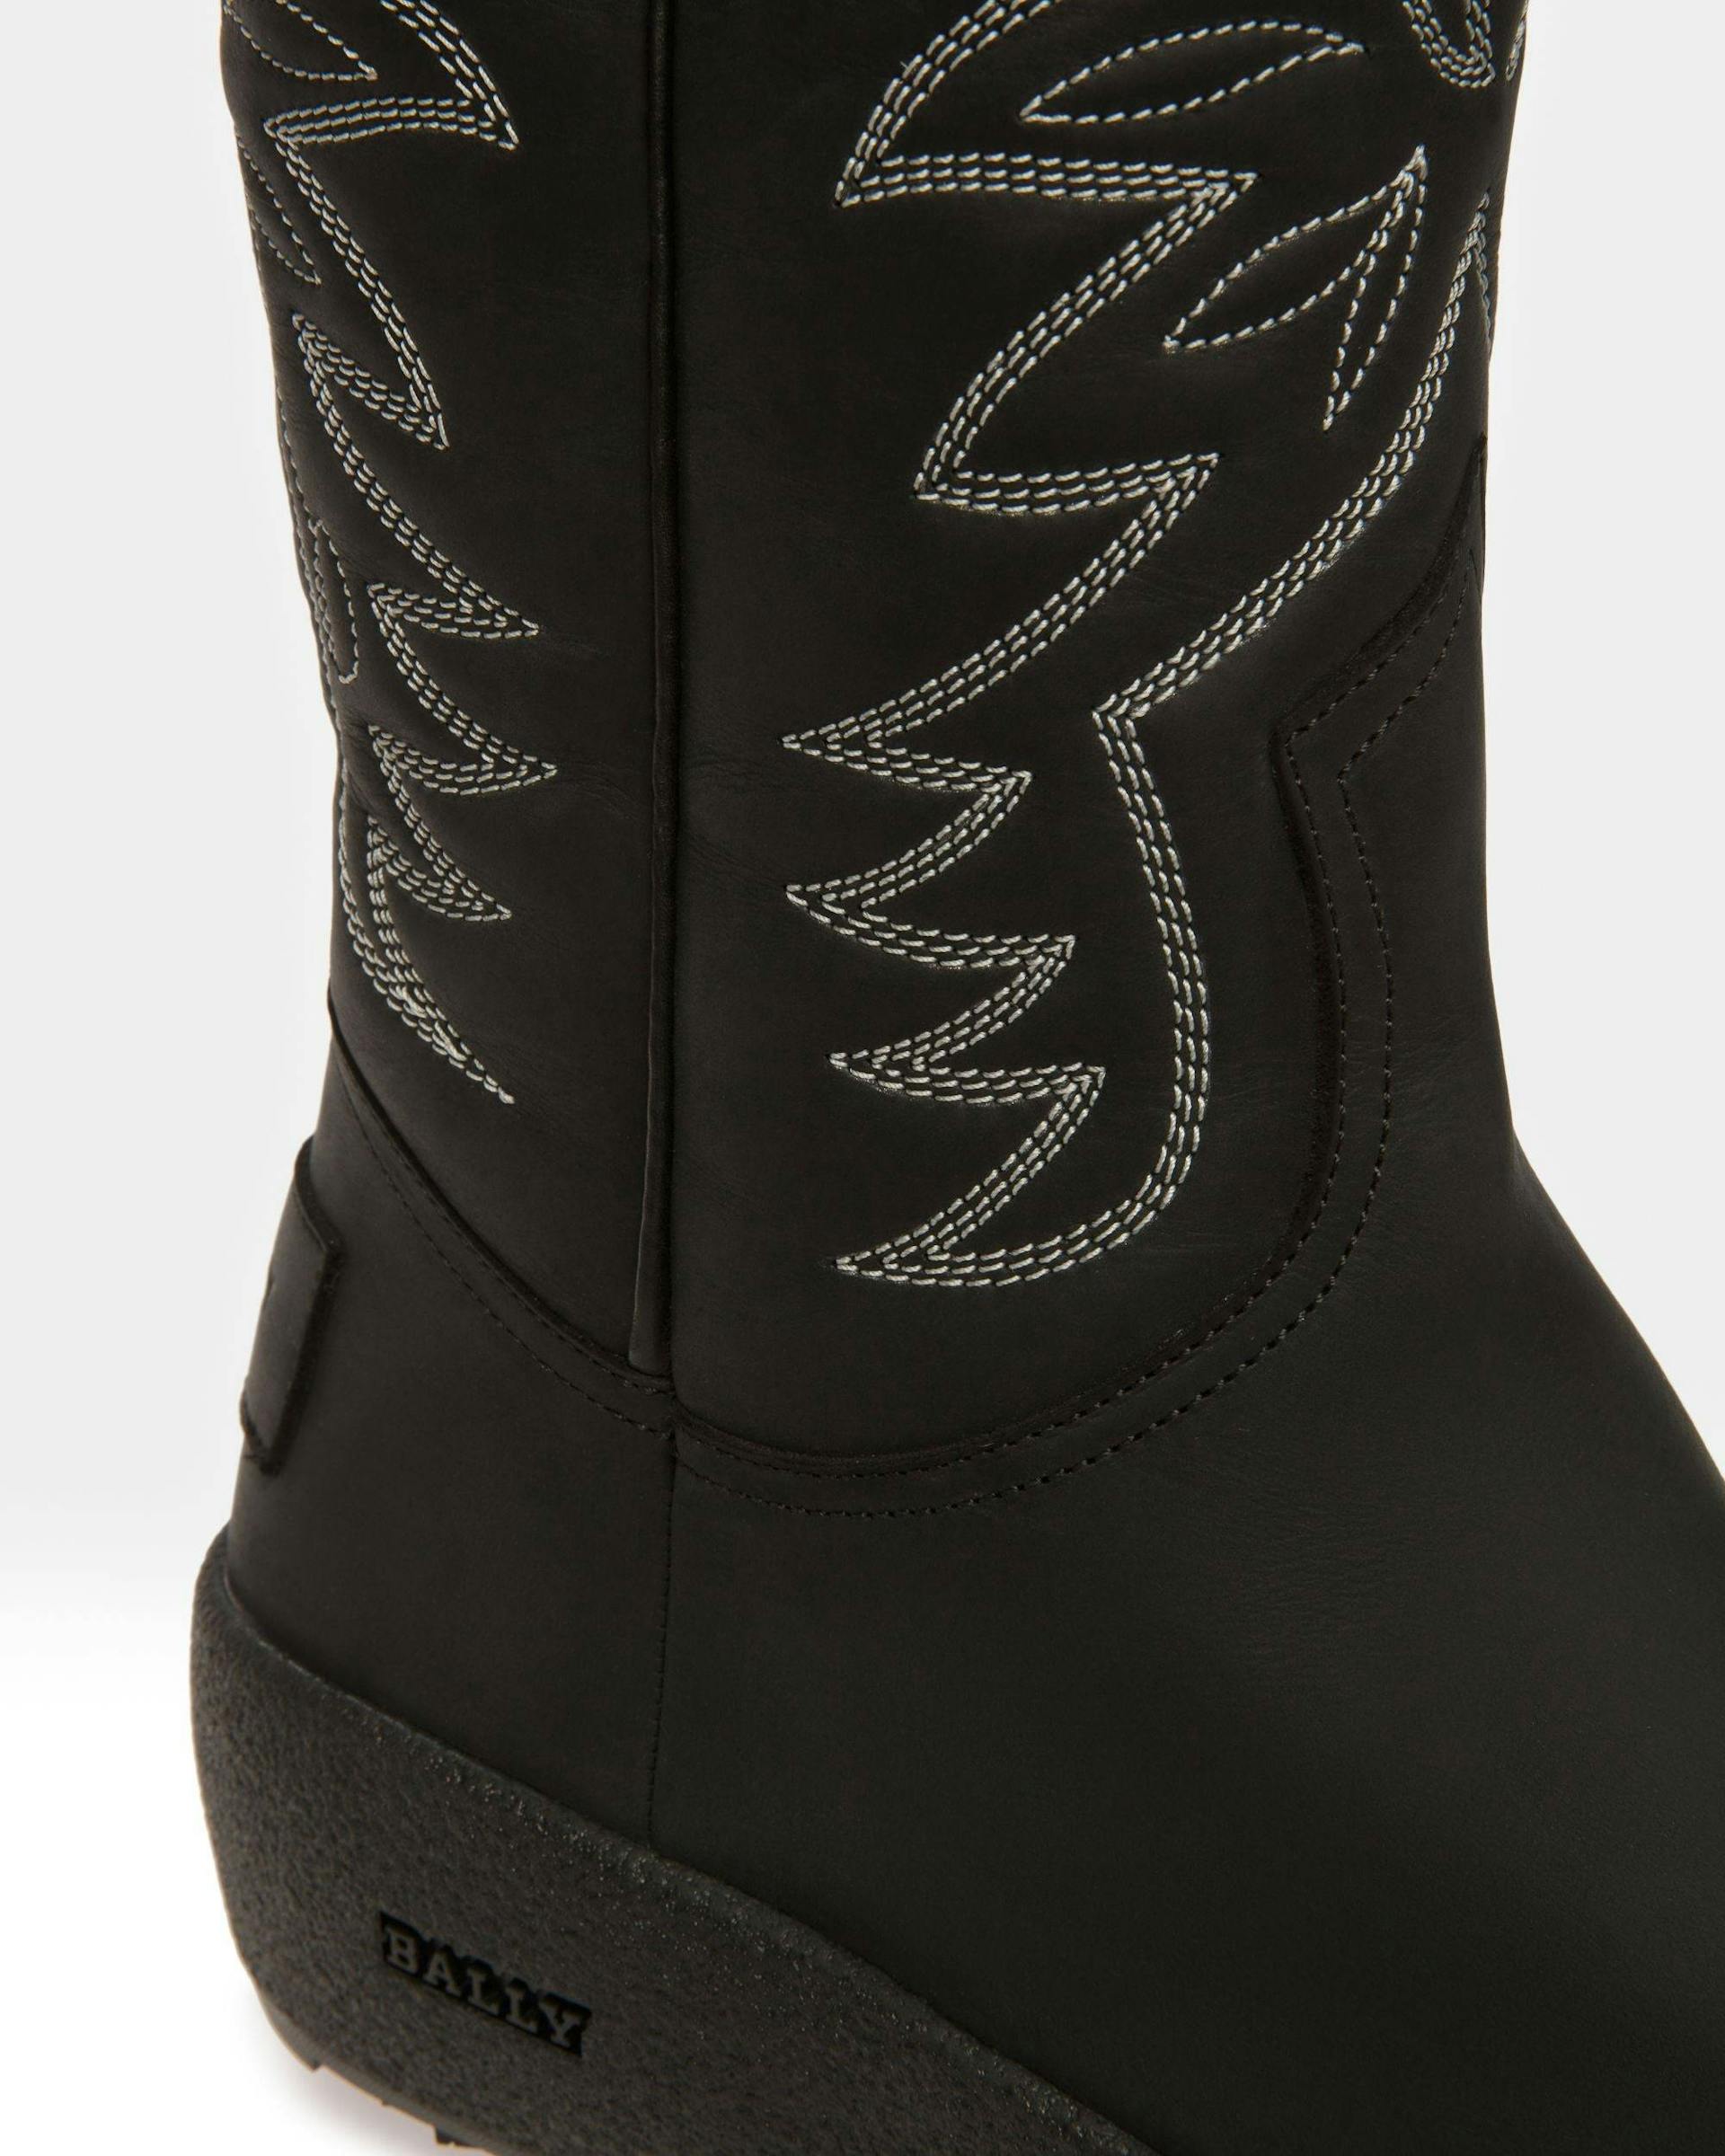 Montana Leather Long Boots In Black - Women's - Bally - 06